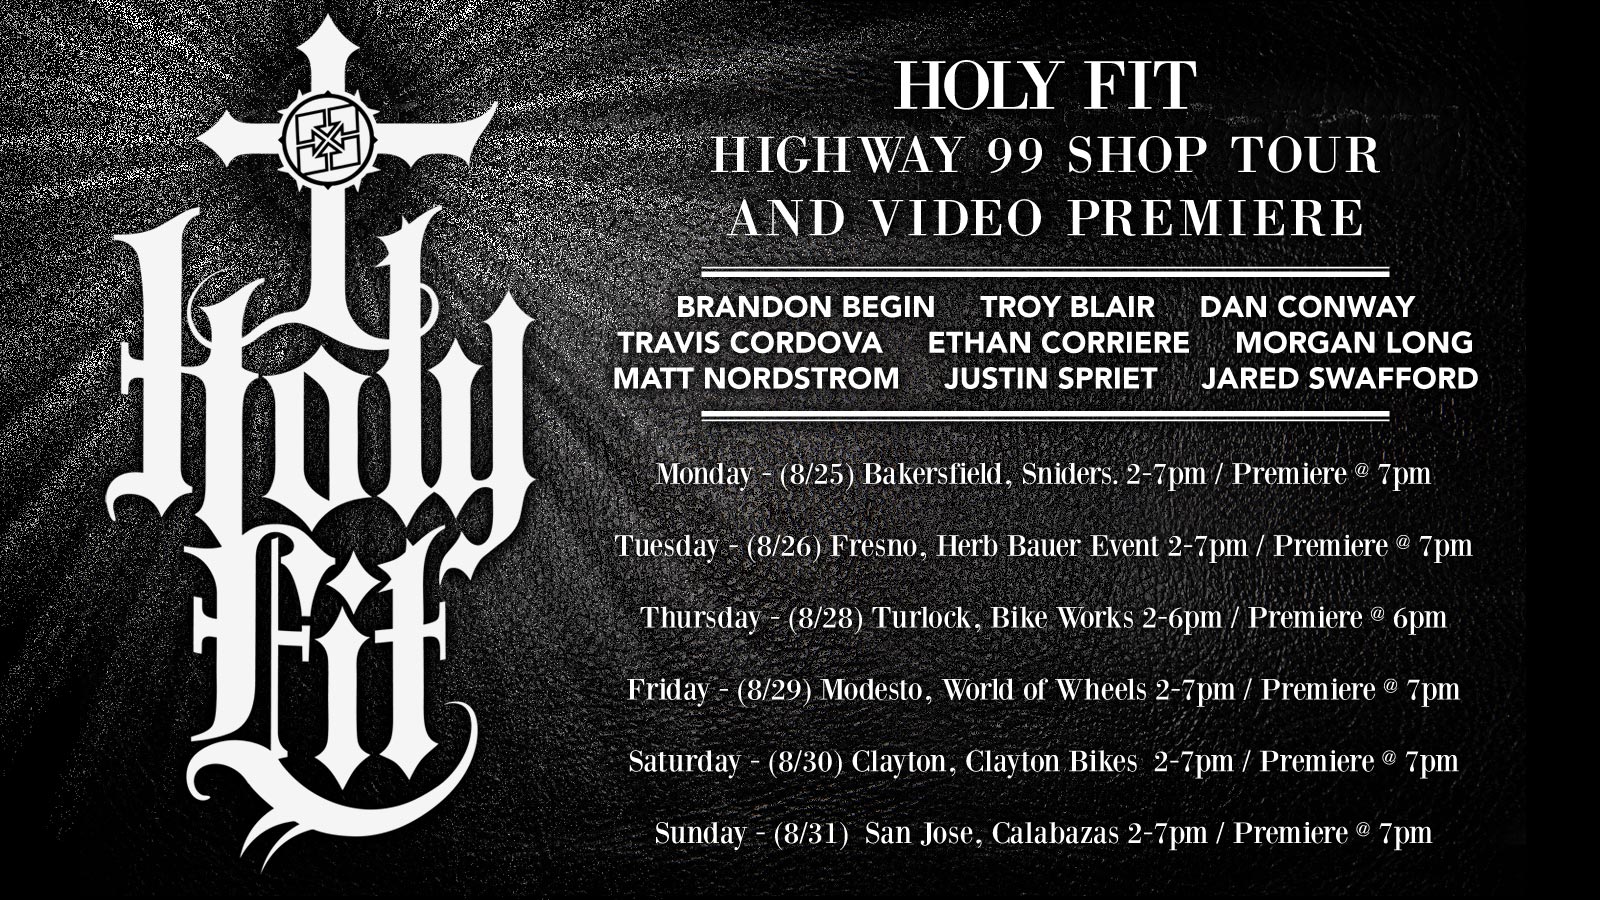 HOLY FIT SHOP AND VIDEO PREMIERE TOUR